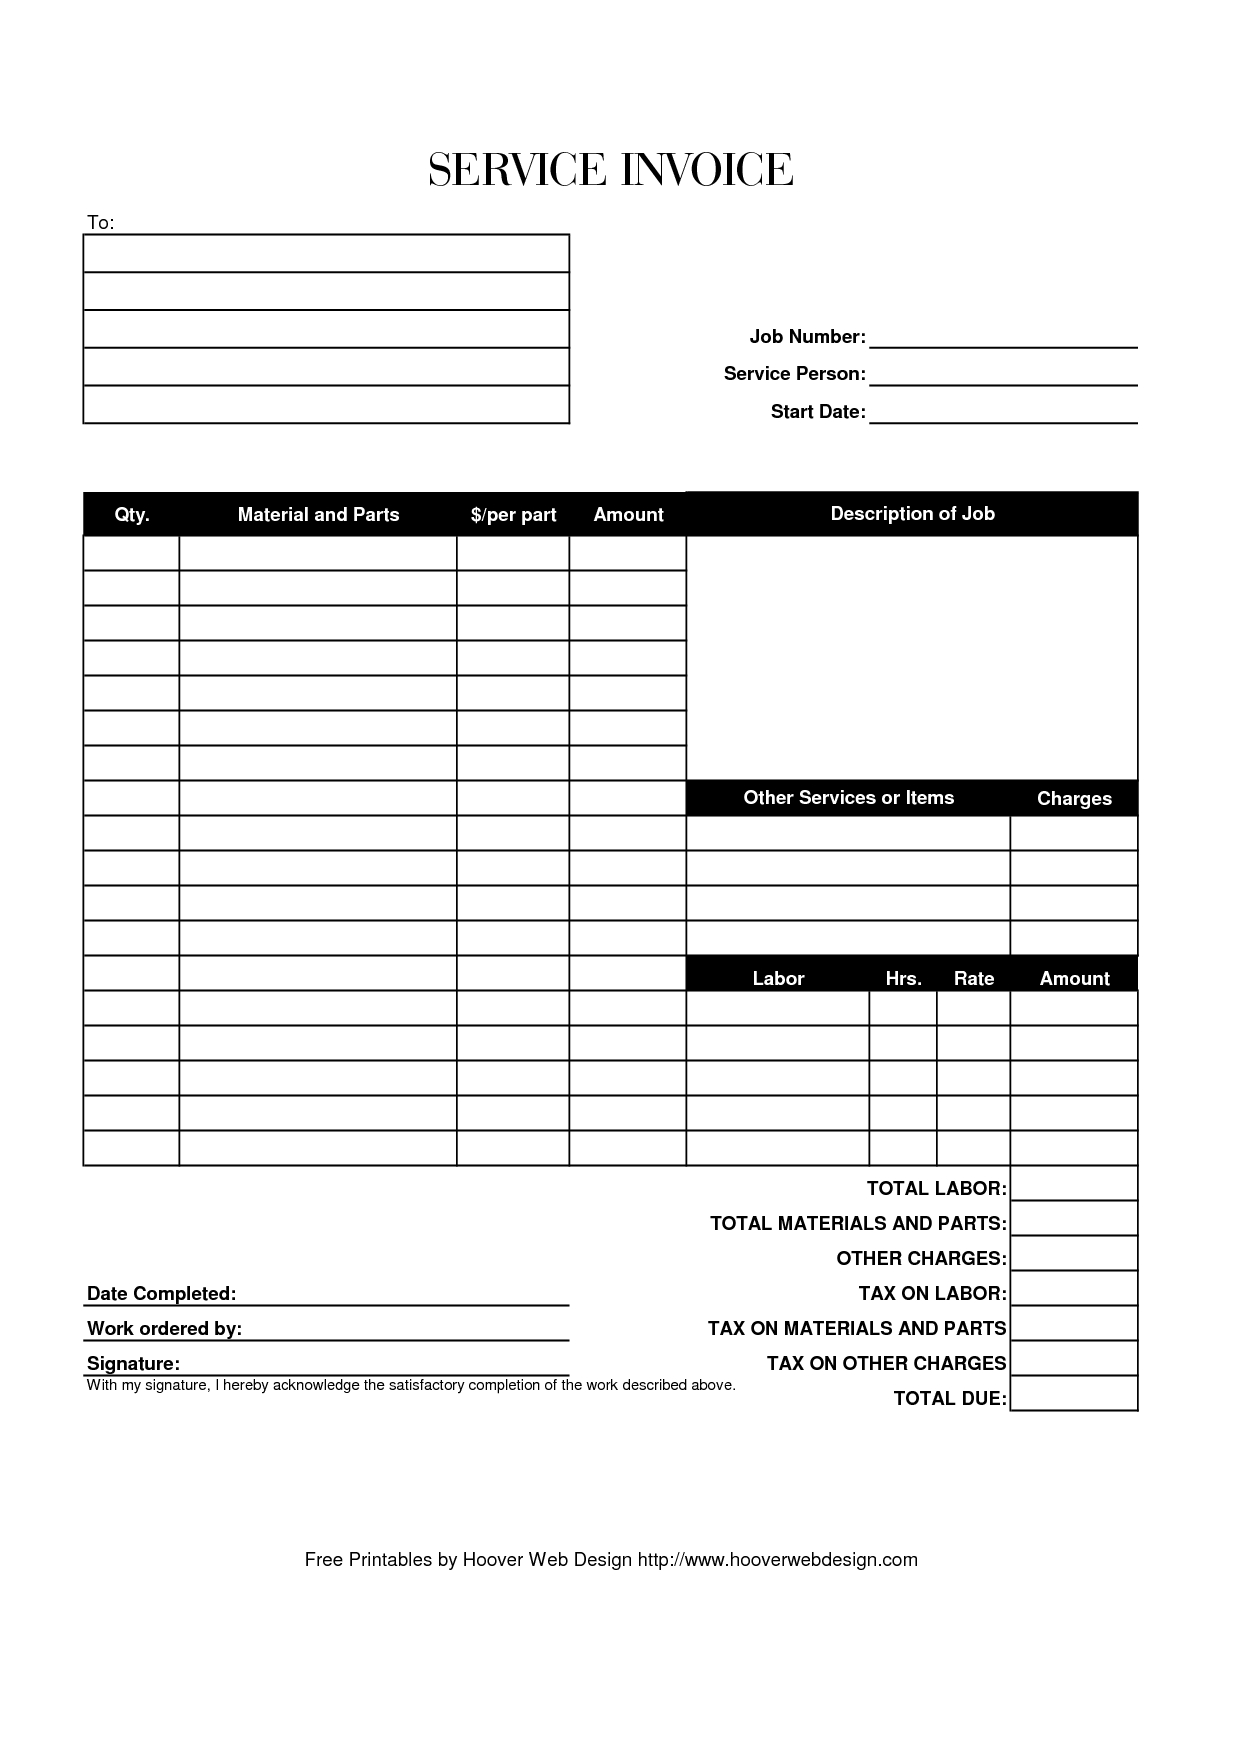 free printable invoice template 10 printable invoice templates and tips to create excel invoice 1240 X 1754